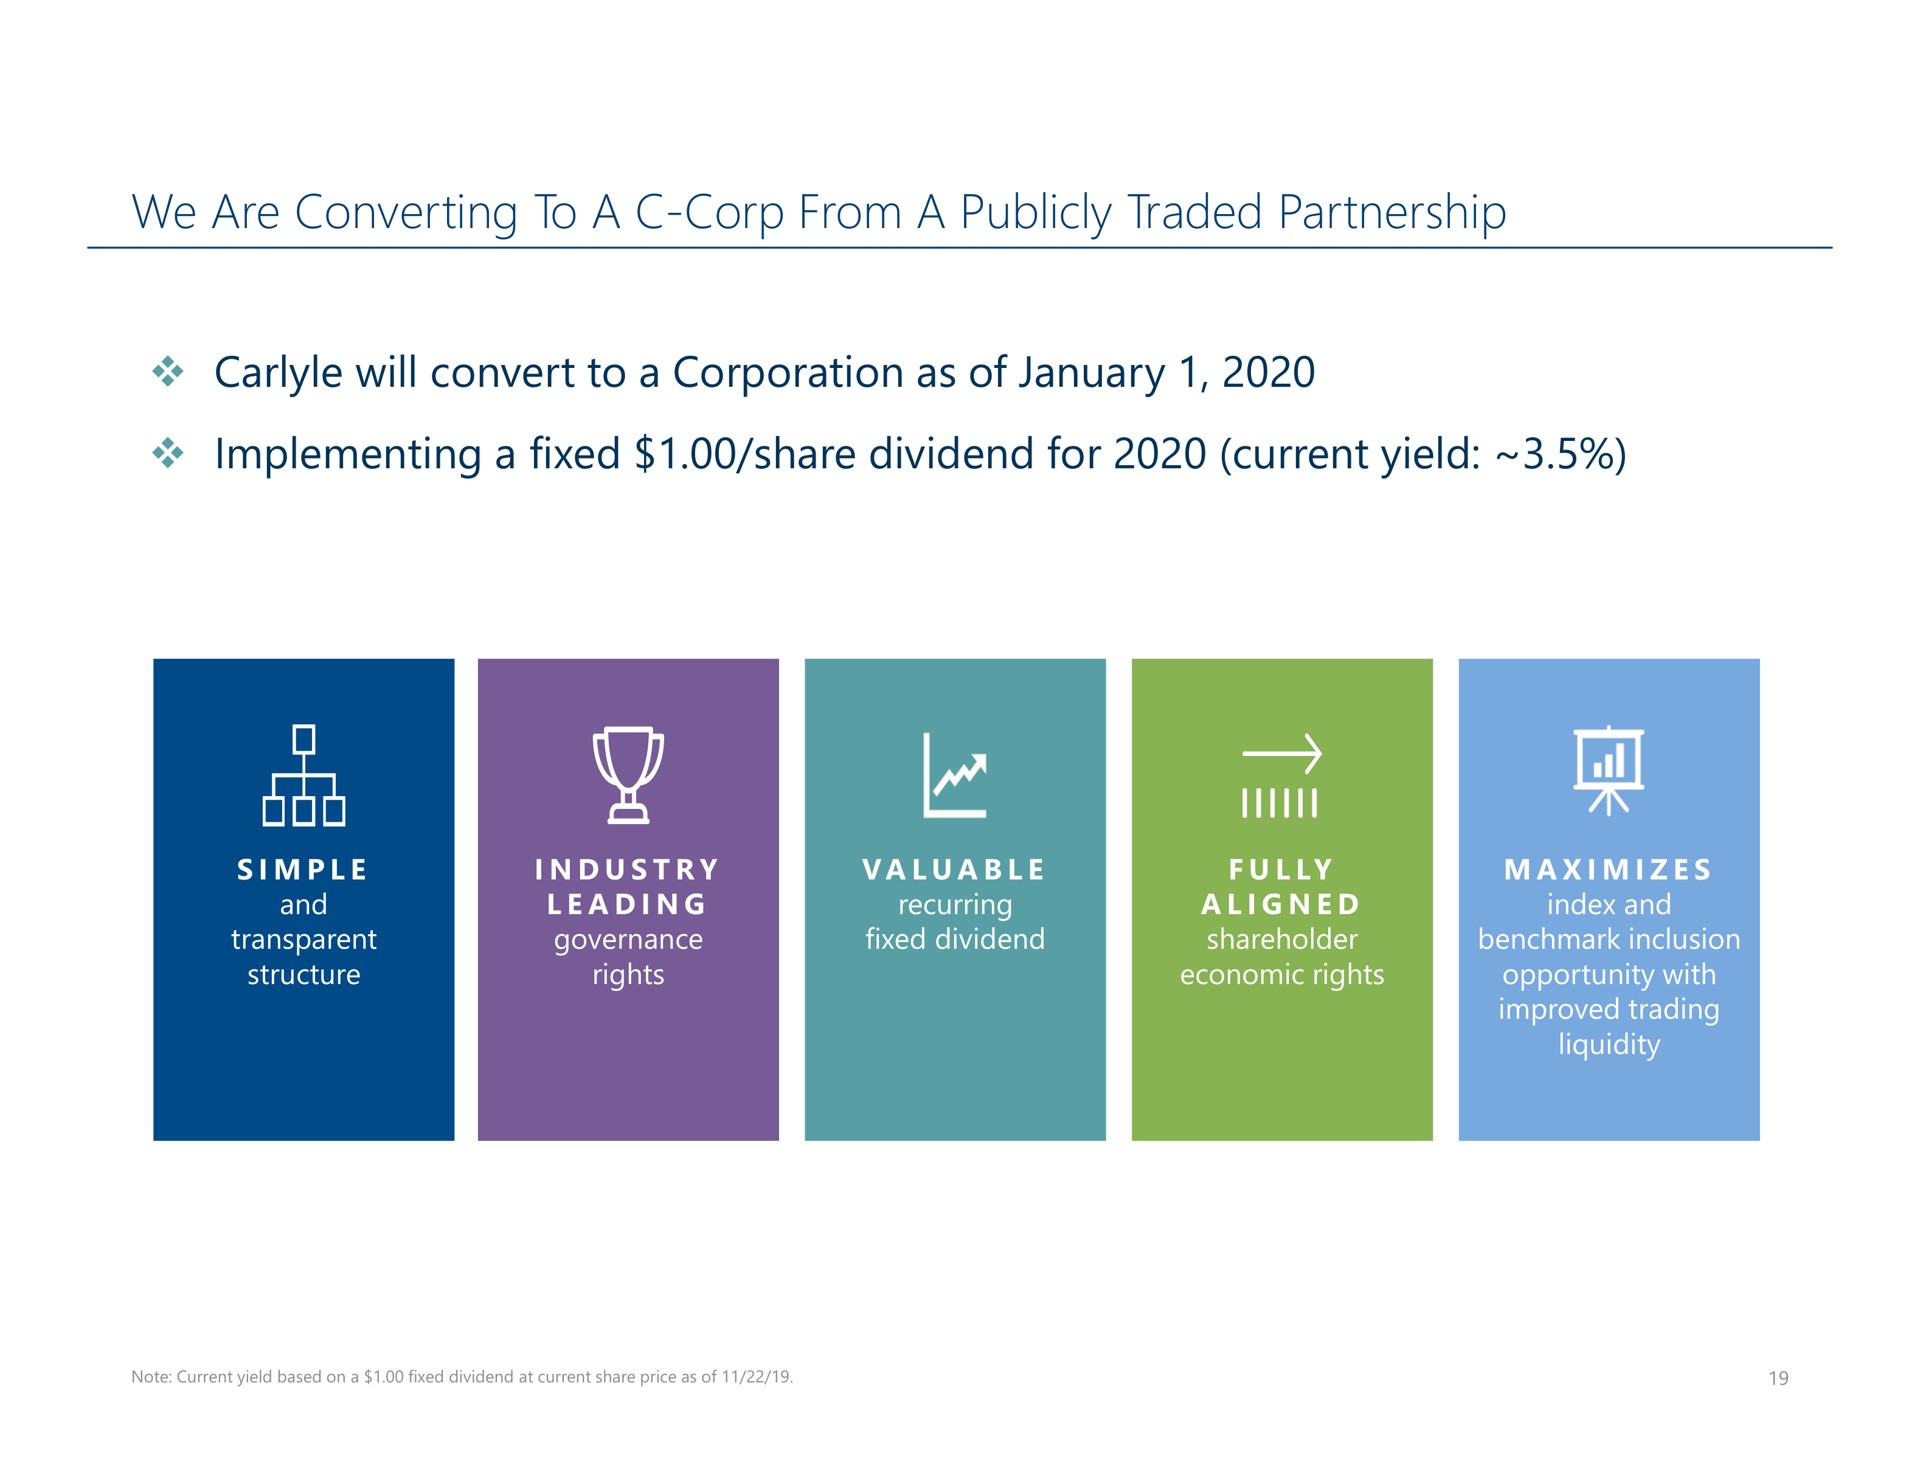 we are converting to a corp from a publicly traded partnership will convert to a corporation as of implementing a fixed share dividend for current yield | Carlyle